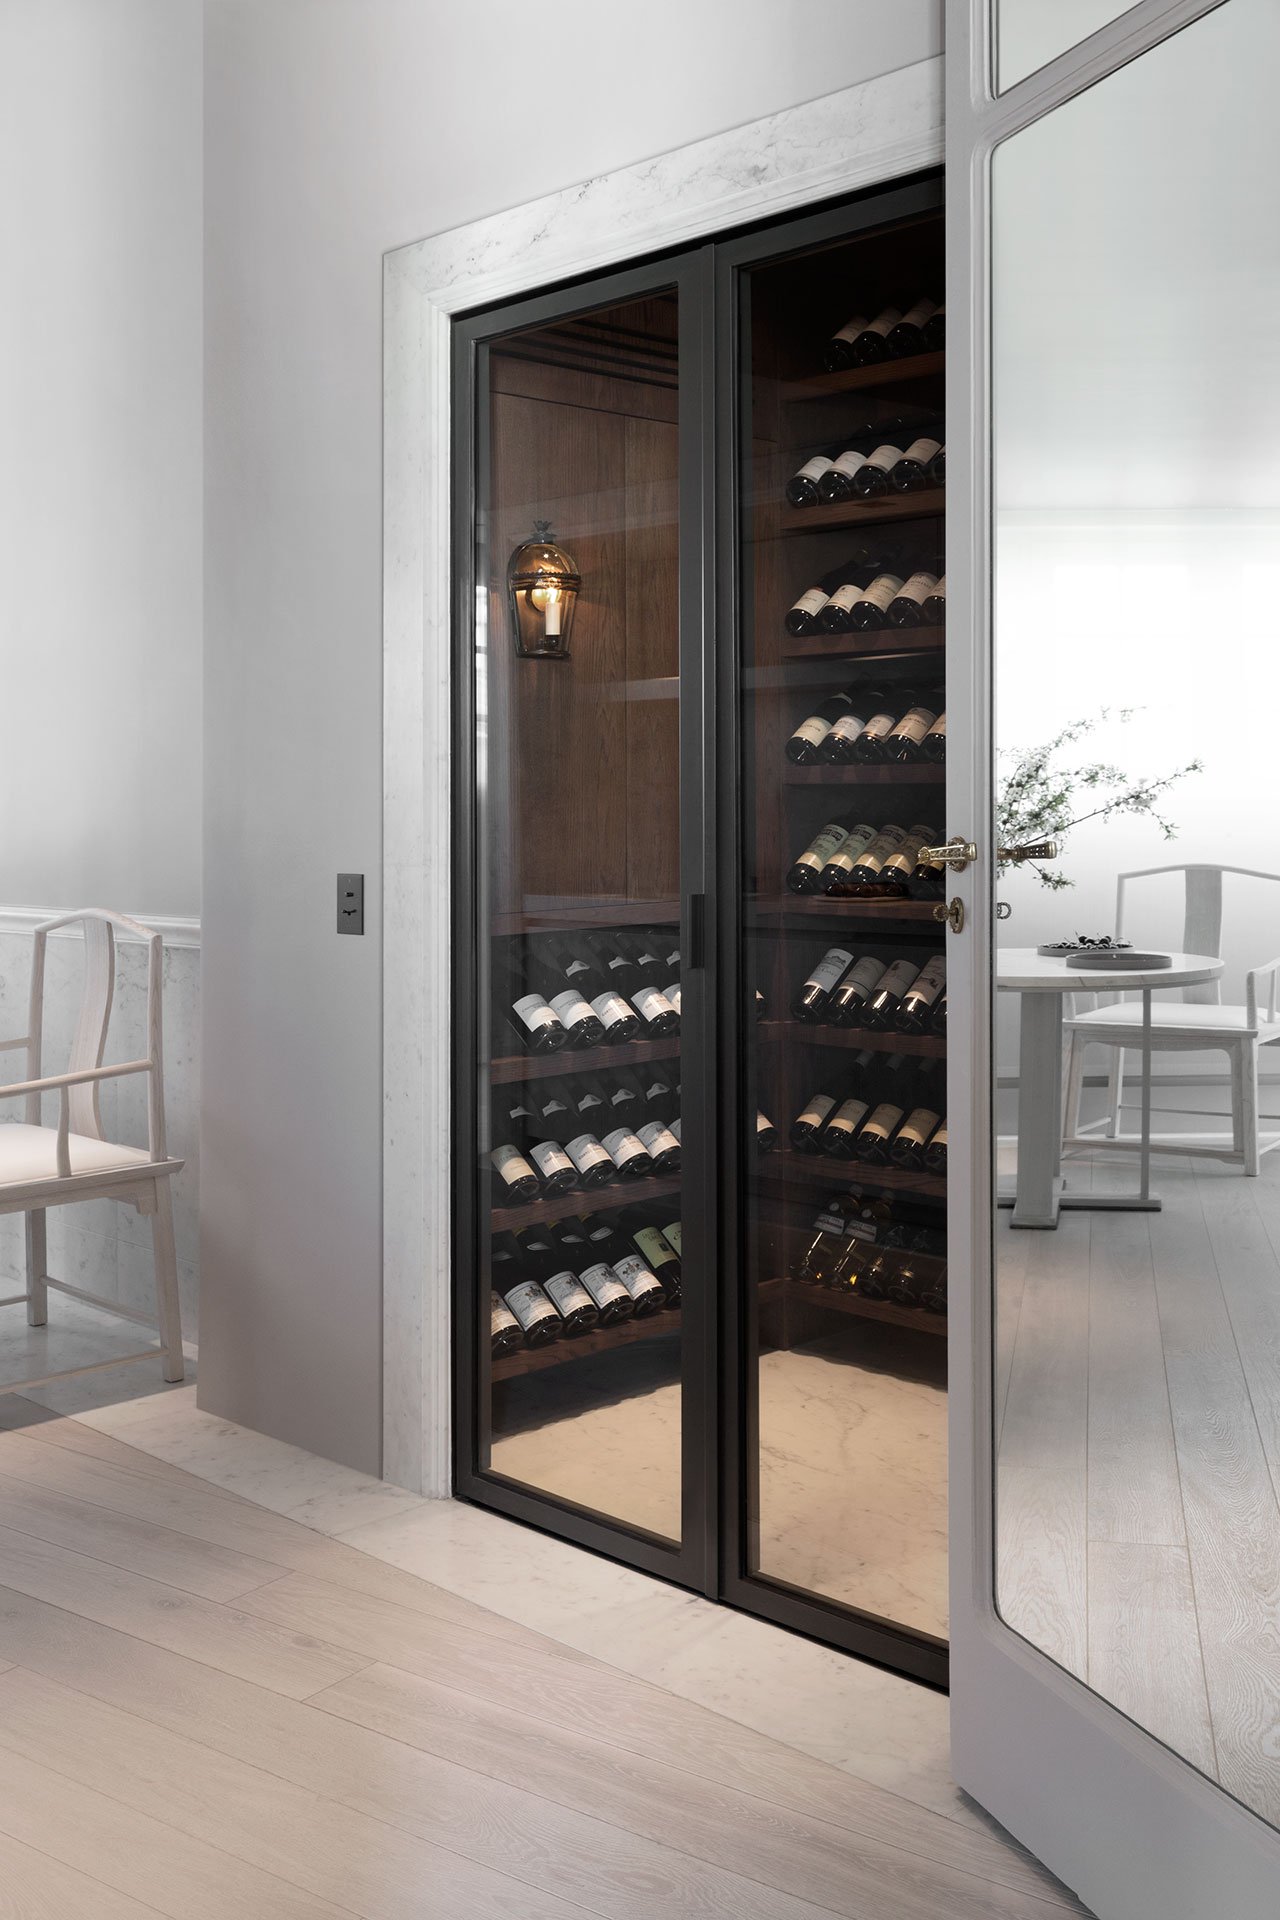 You may see a small modern wine cellar in the kitchen, too